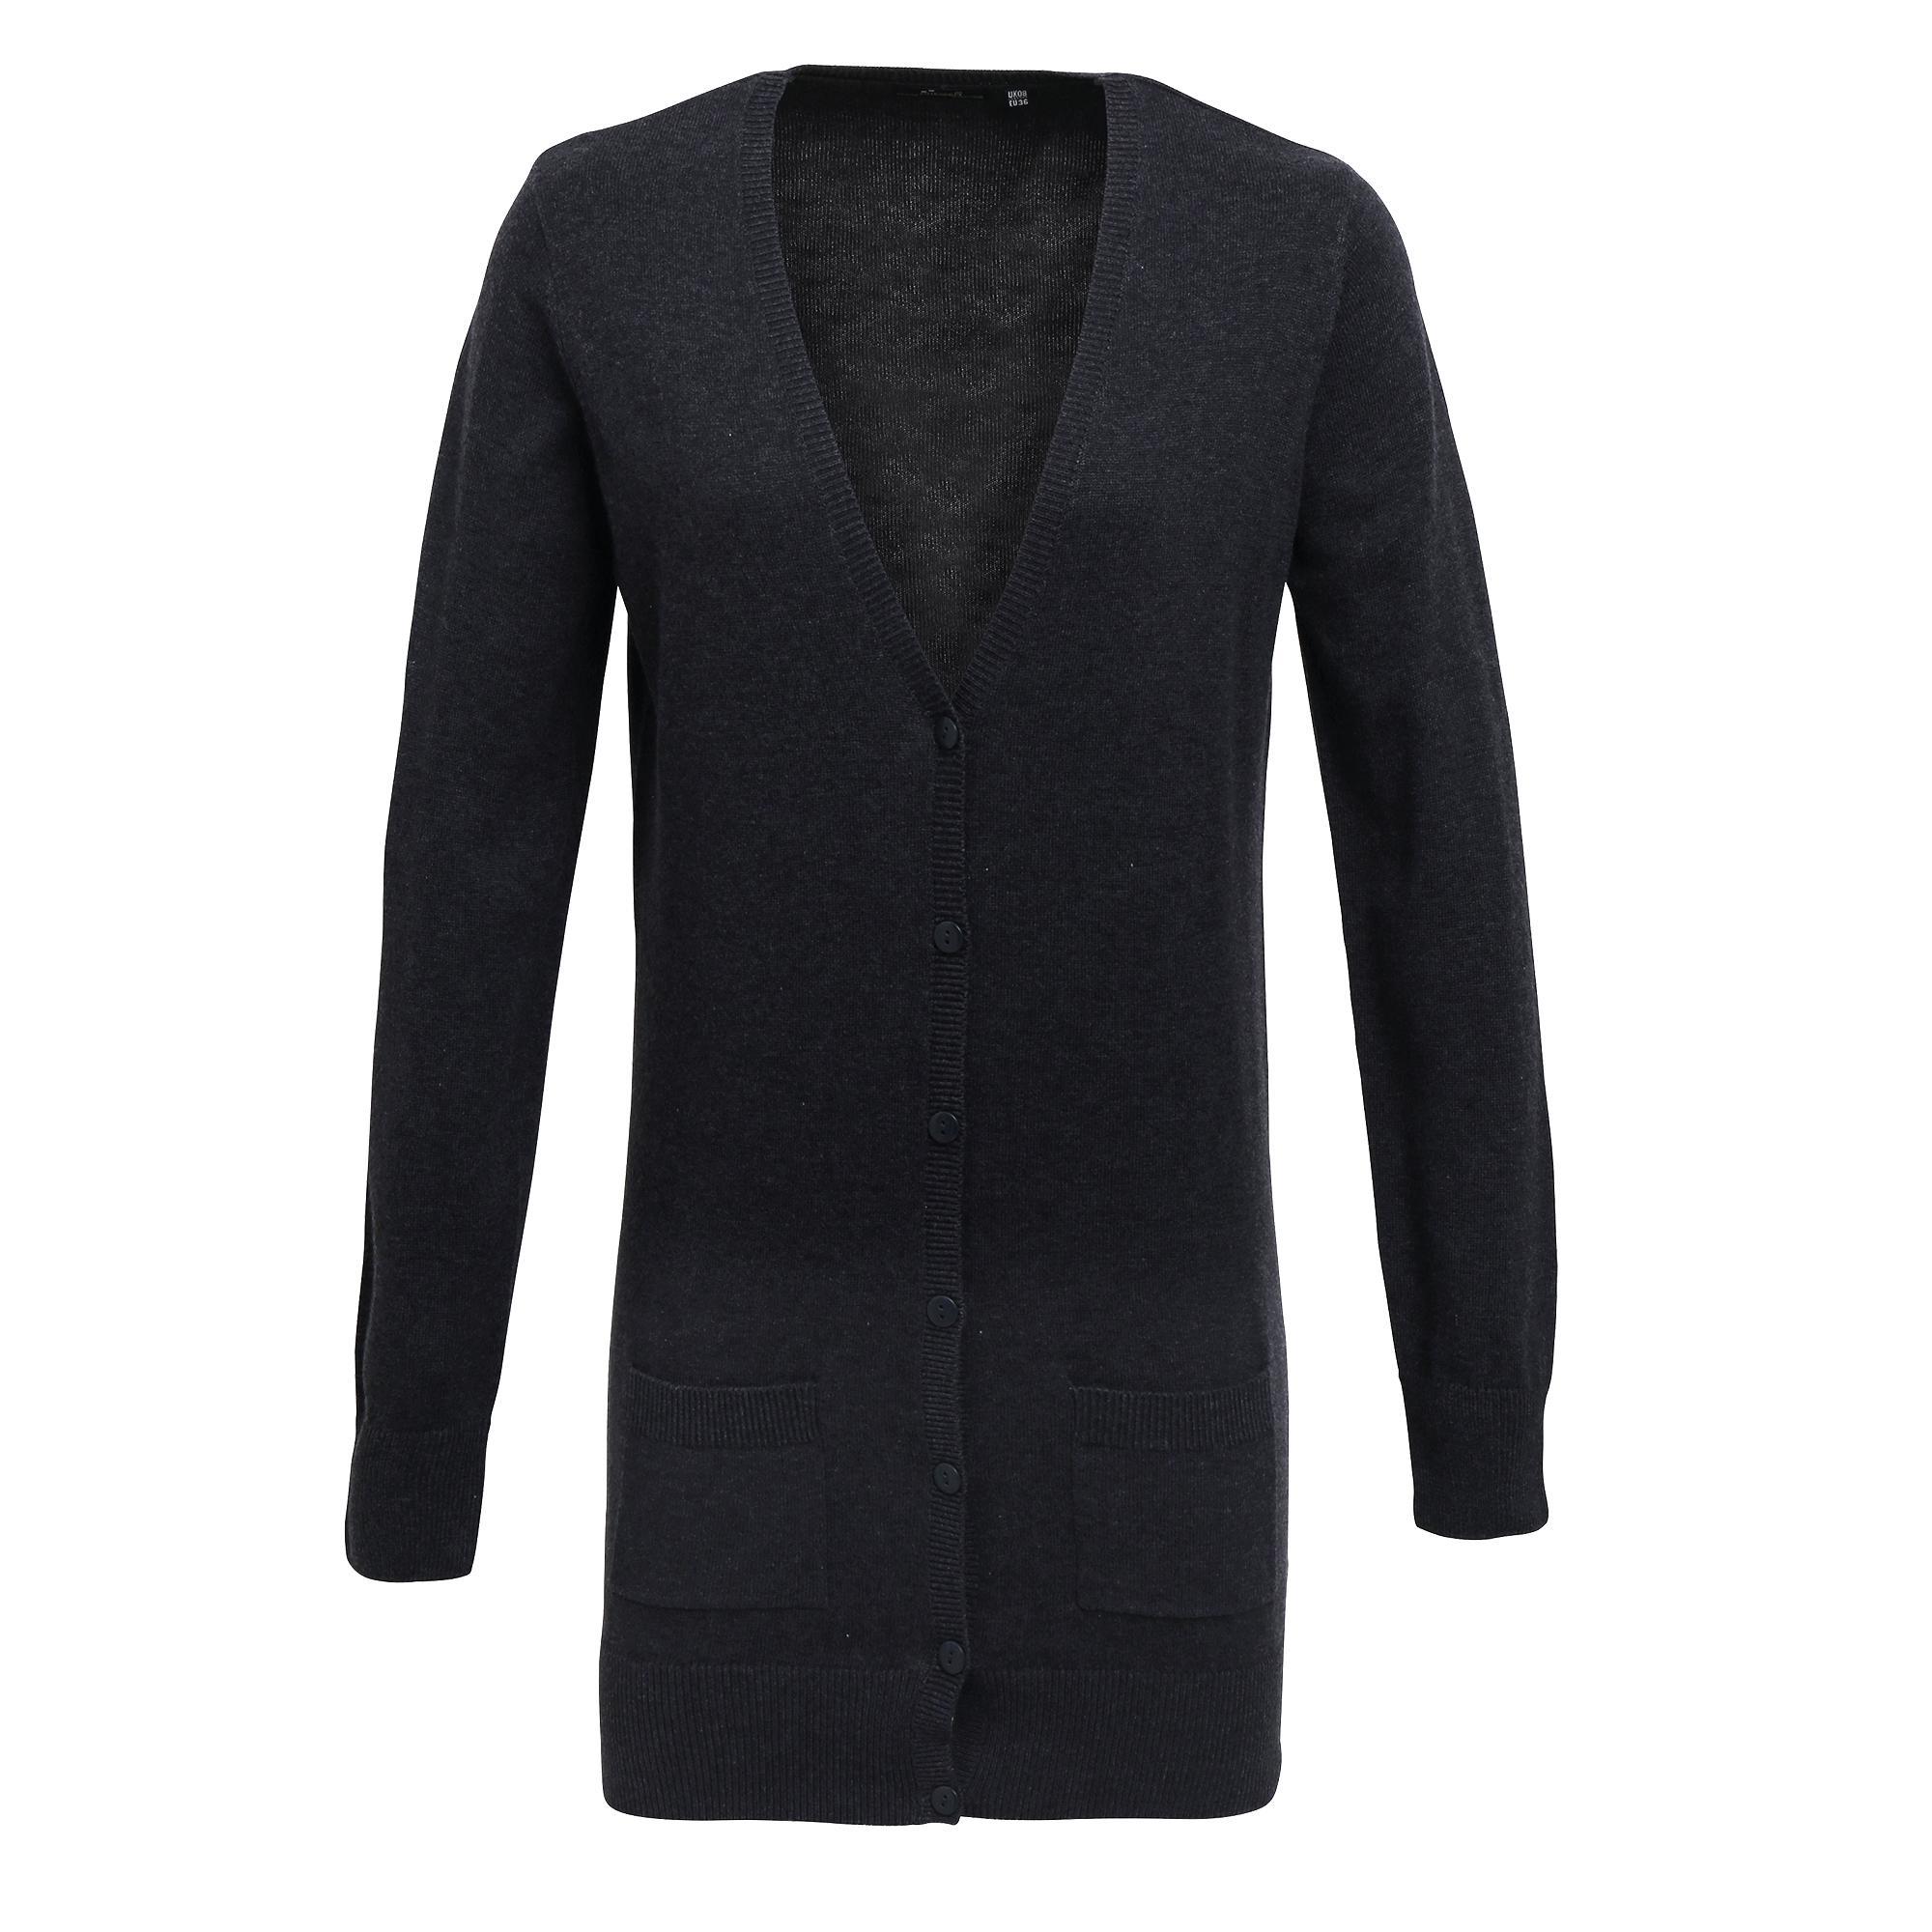 Premier Womens/Ladies Longline V Neck Knitted Cardigan (Charcoal) (16)